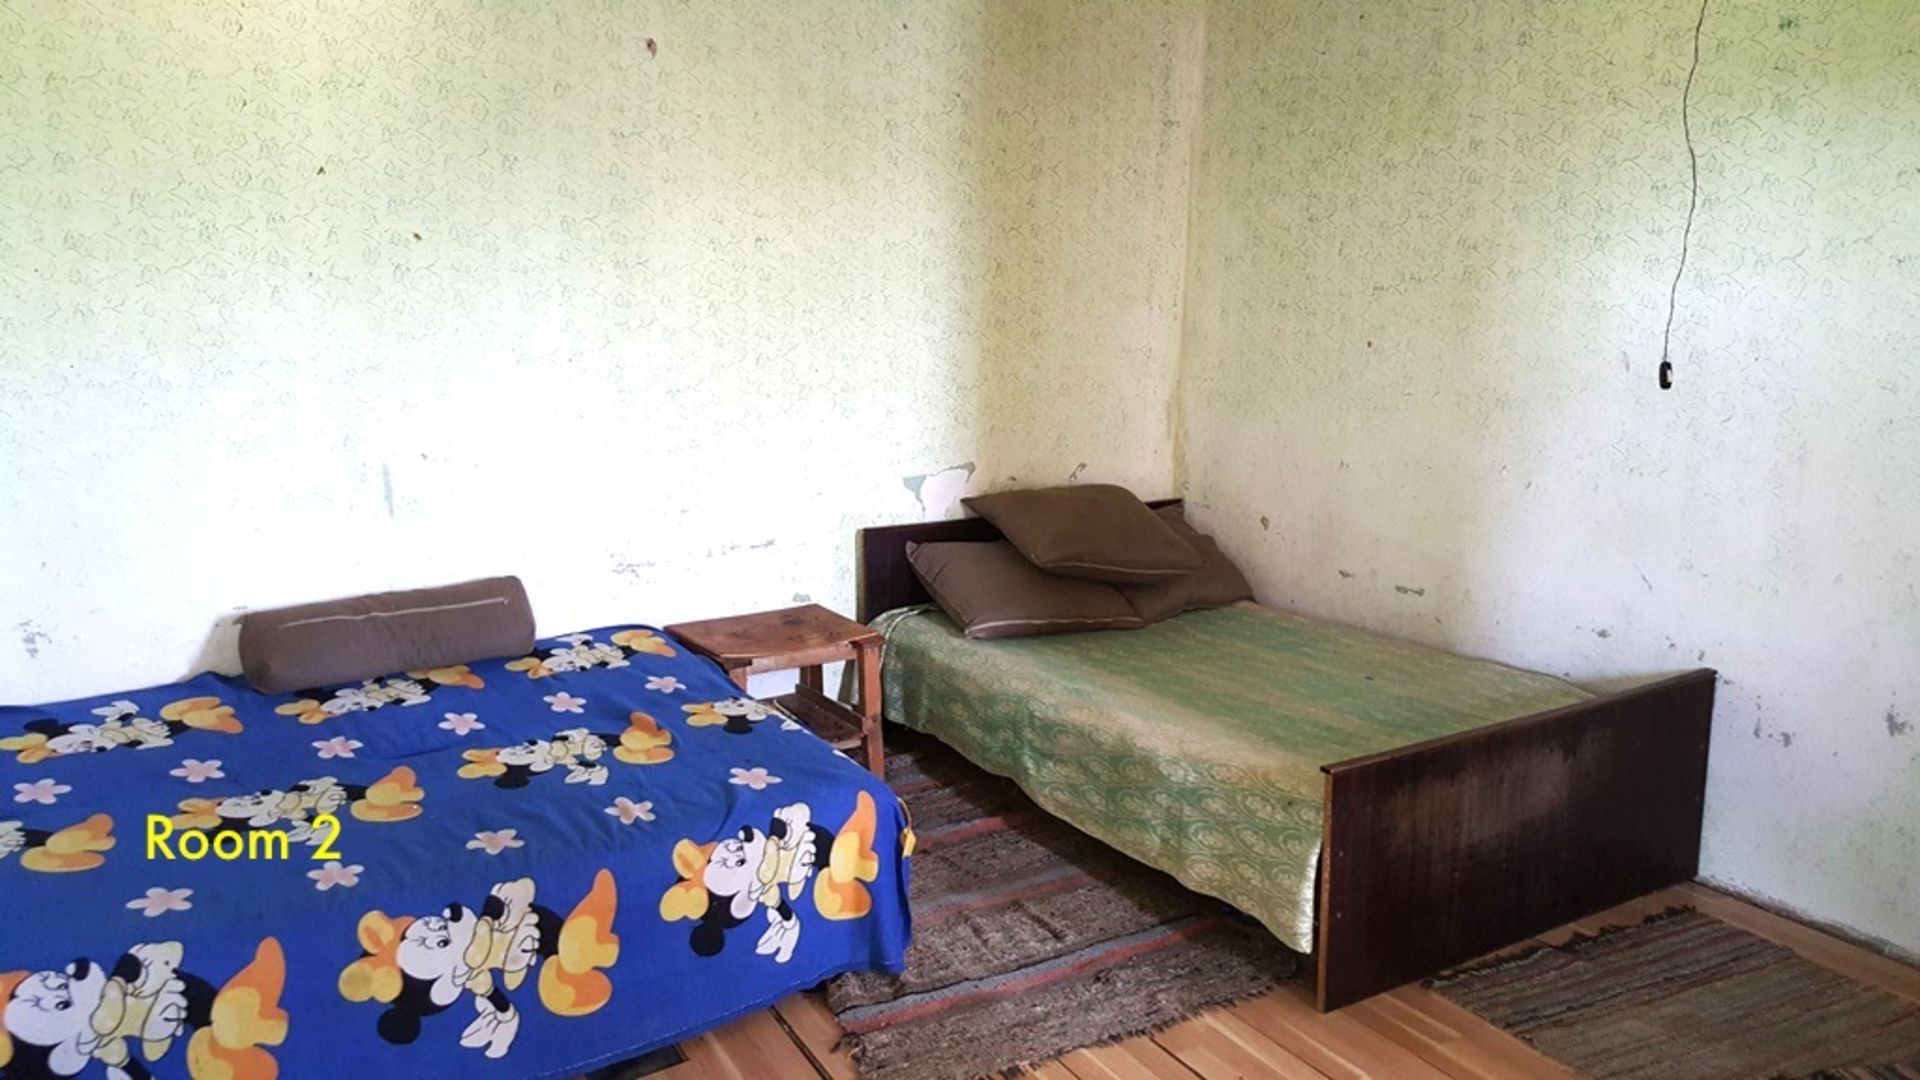 SUNFLOWER COTTAGE IN KRASEN, BULGARIA  - 30 miles from Beach! - Image 22 of 64